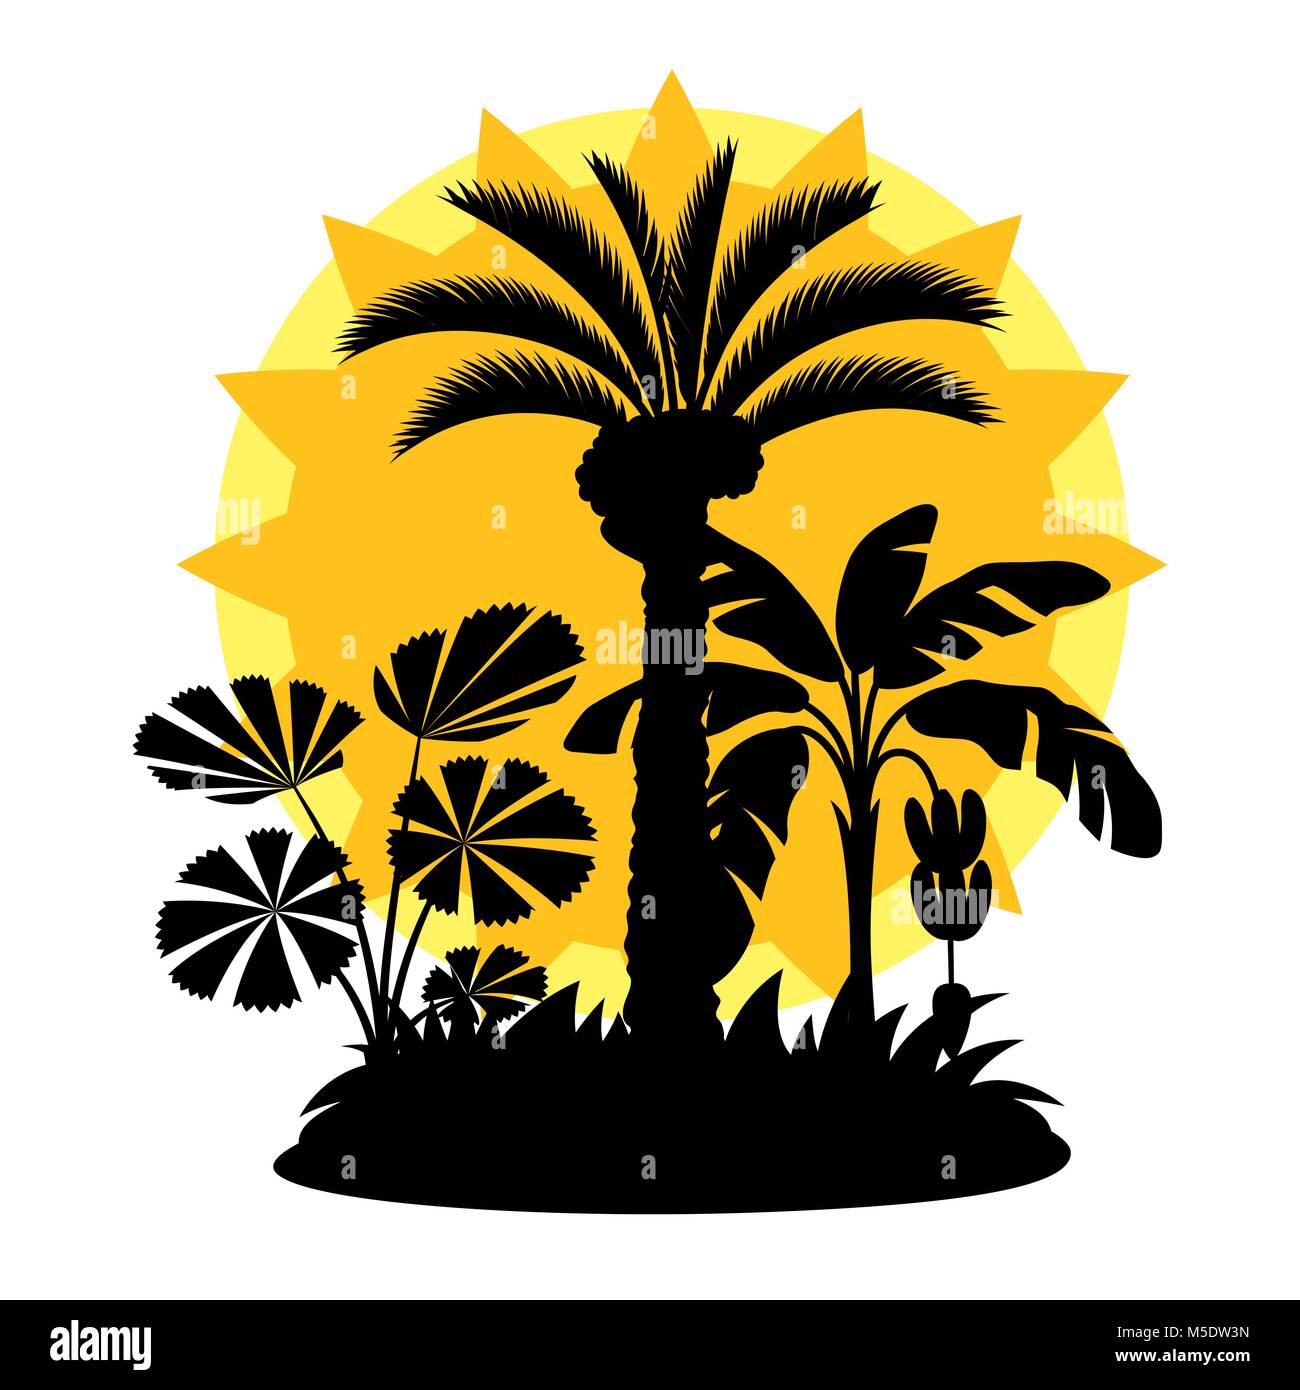 Card with tropical palm trees. Exotic tropical plants Illustration of jungle nature Stock Vector